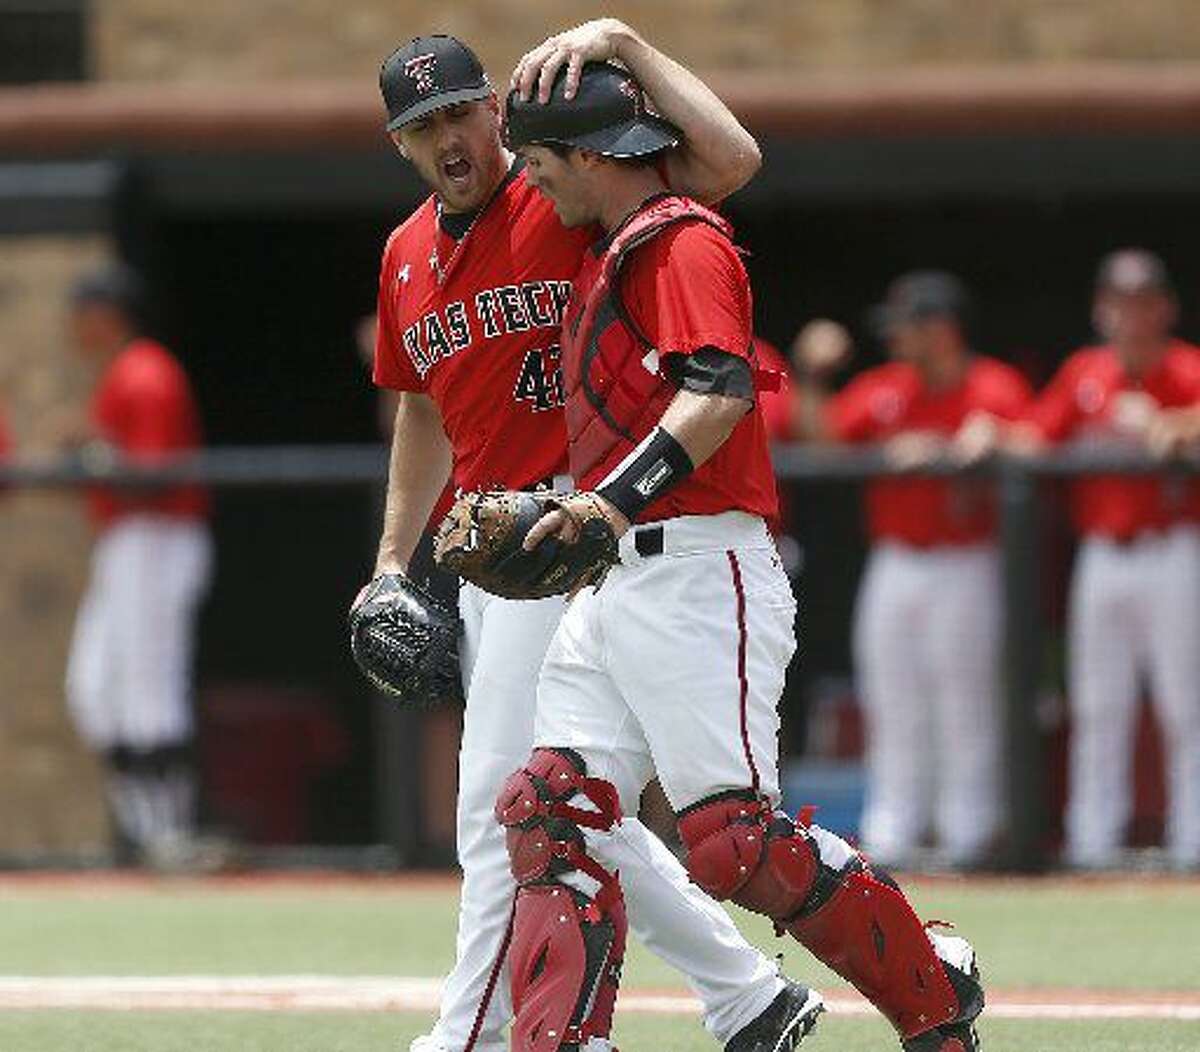 Texas Tech's Chris Sadberry (42) celebrates with Hunter Redman, right, after an out against College of Charleston during an NCAA college baseball tournament super regional game in Lubbock, Texas, Saturday, June 7, 2014. Texas Tech won 1-0. (AP Photo/Lubbock Avalanche Journal, Shannon Wilson)